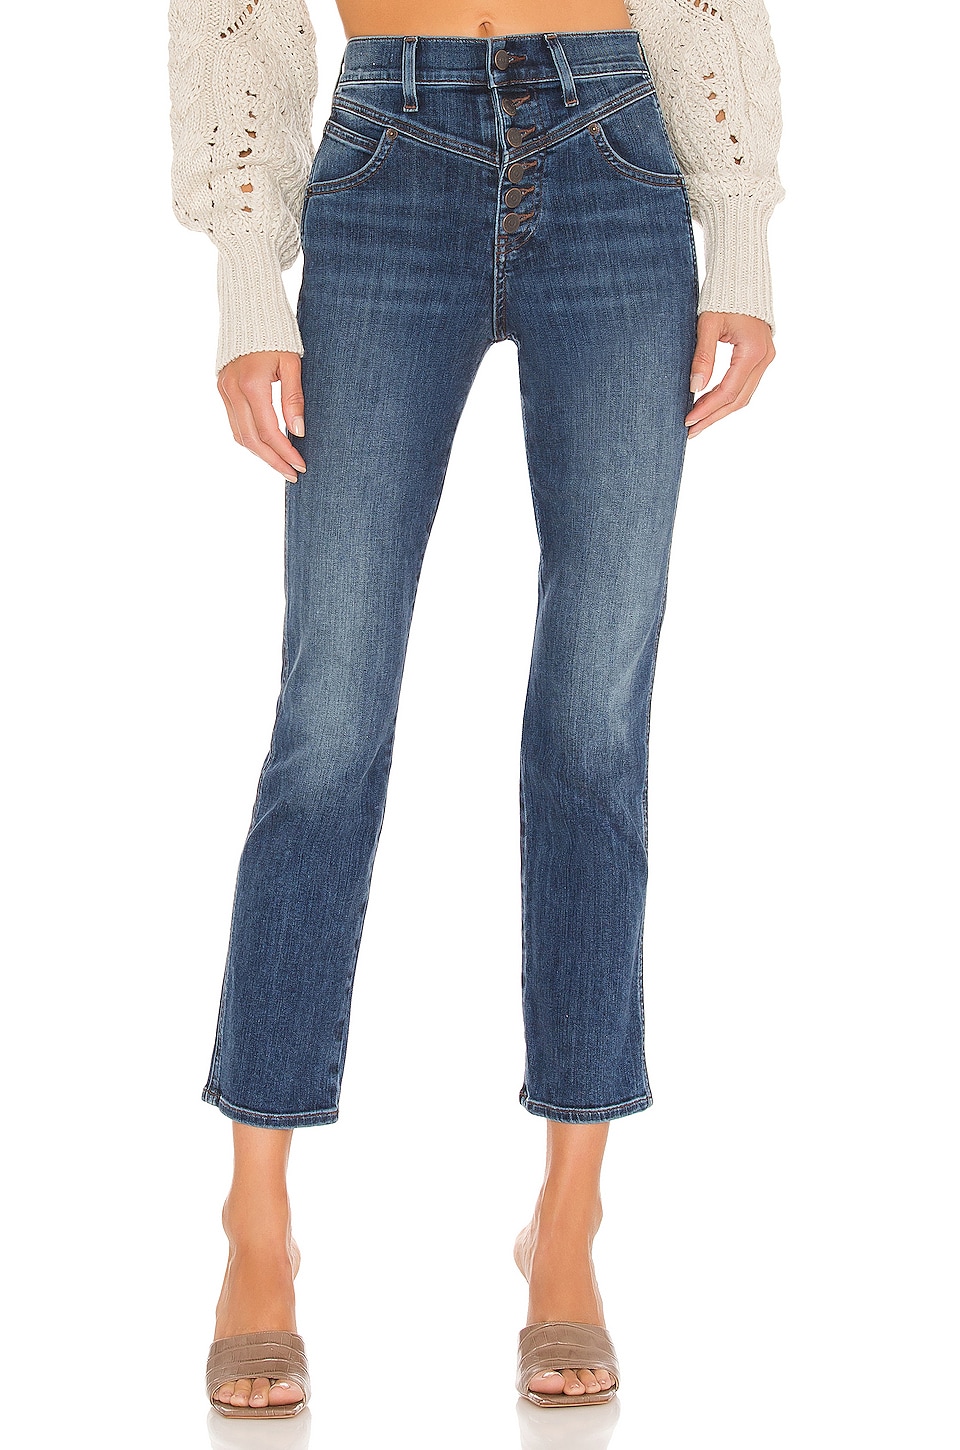 Veronica Beard Ryleigh High Rise With Front Yoke Jeans In Laguna Revolve